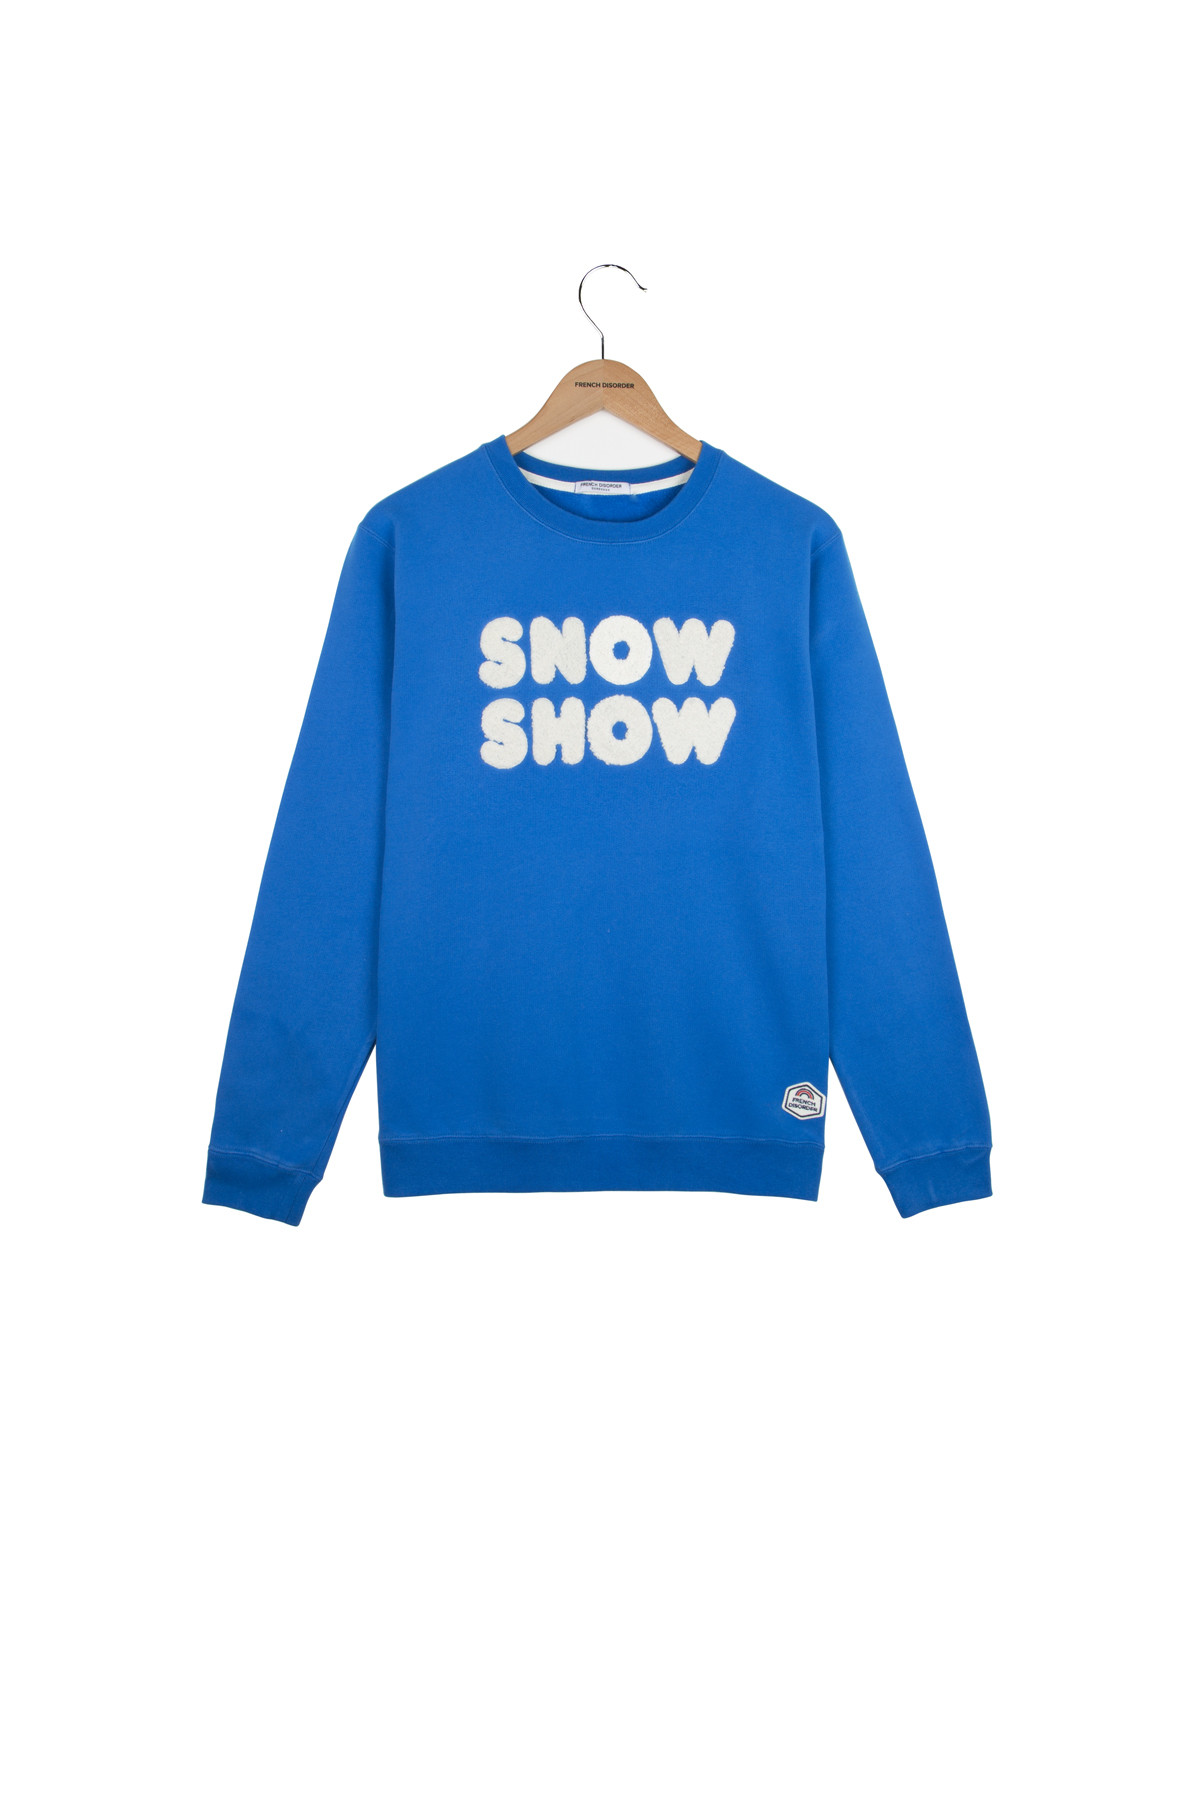 Photo de Soldes Kids Sweat SNOW SHOW broderie chez French Disorder